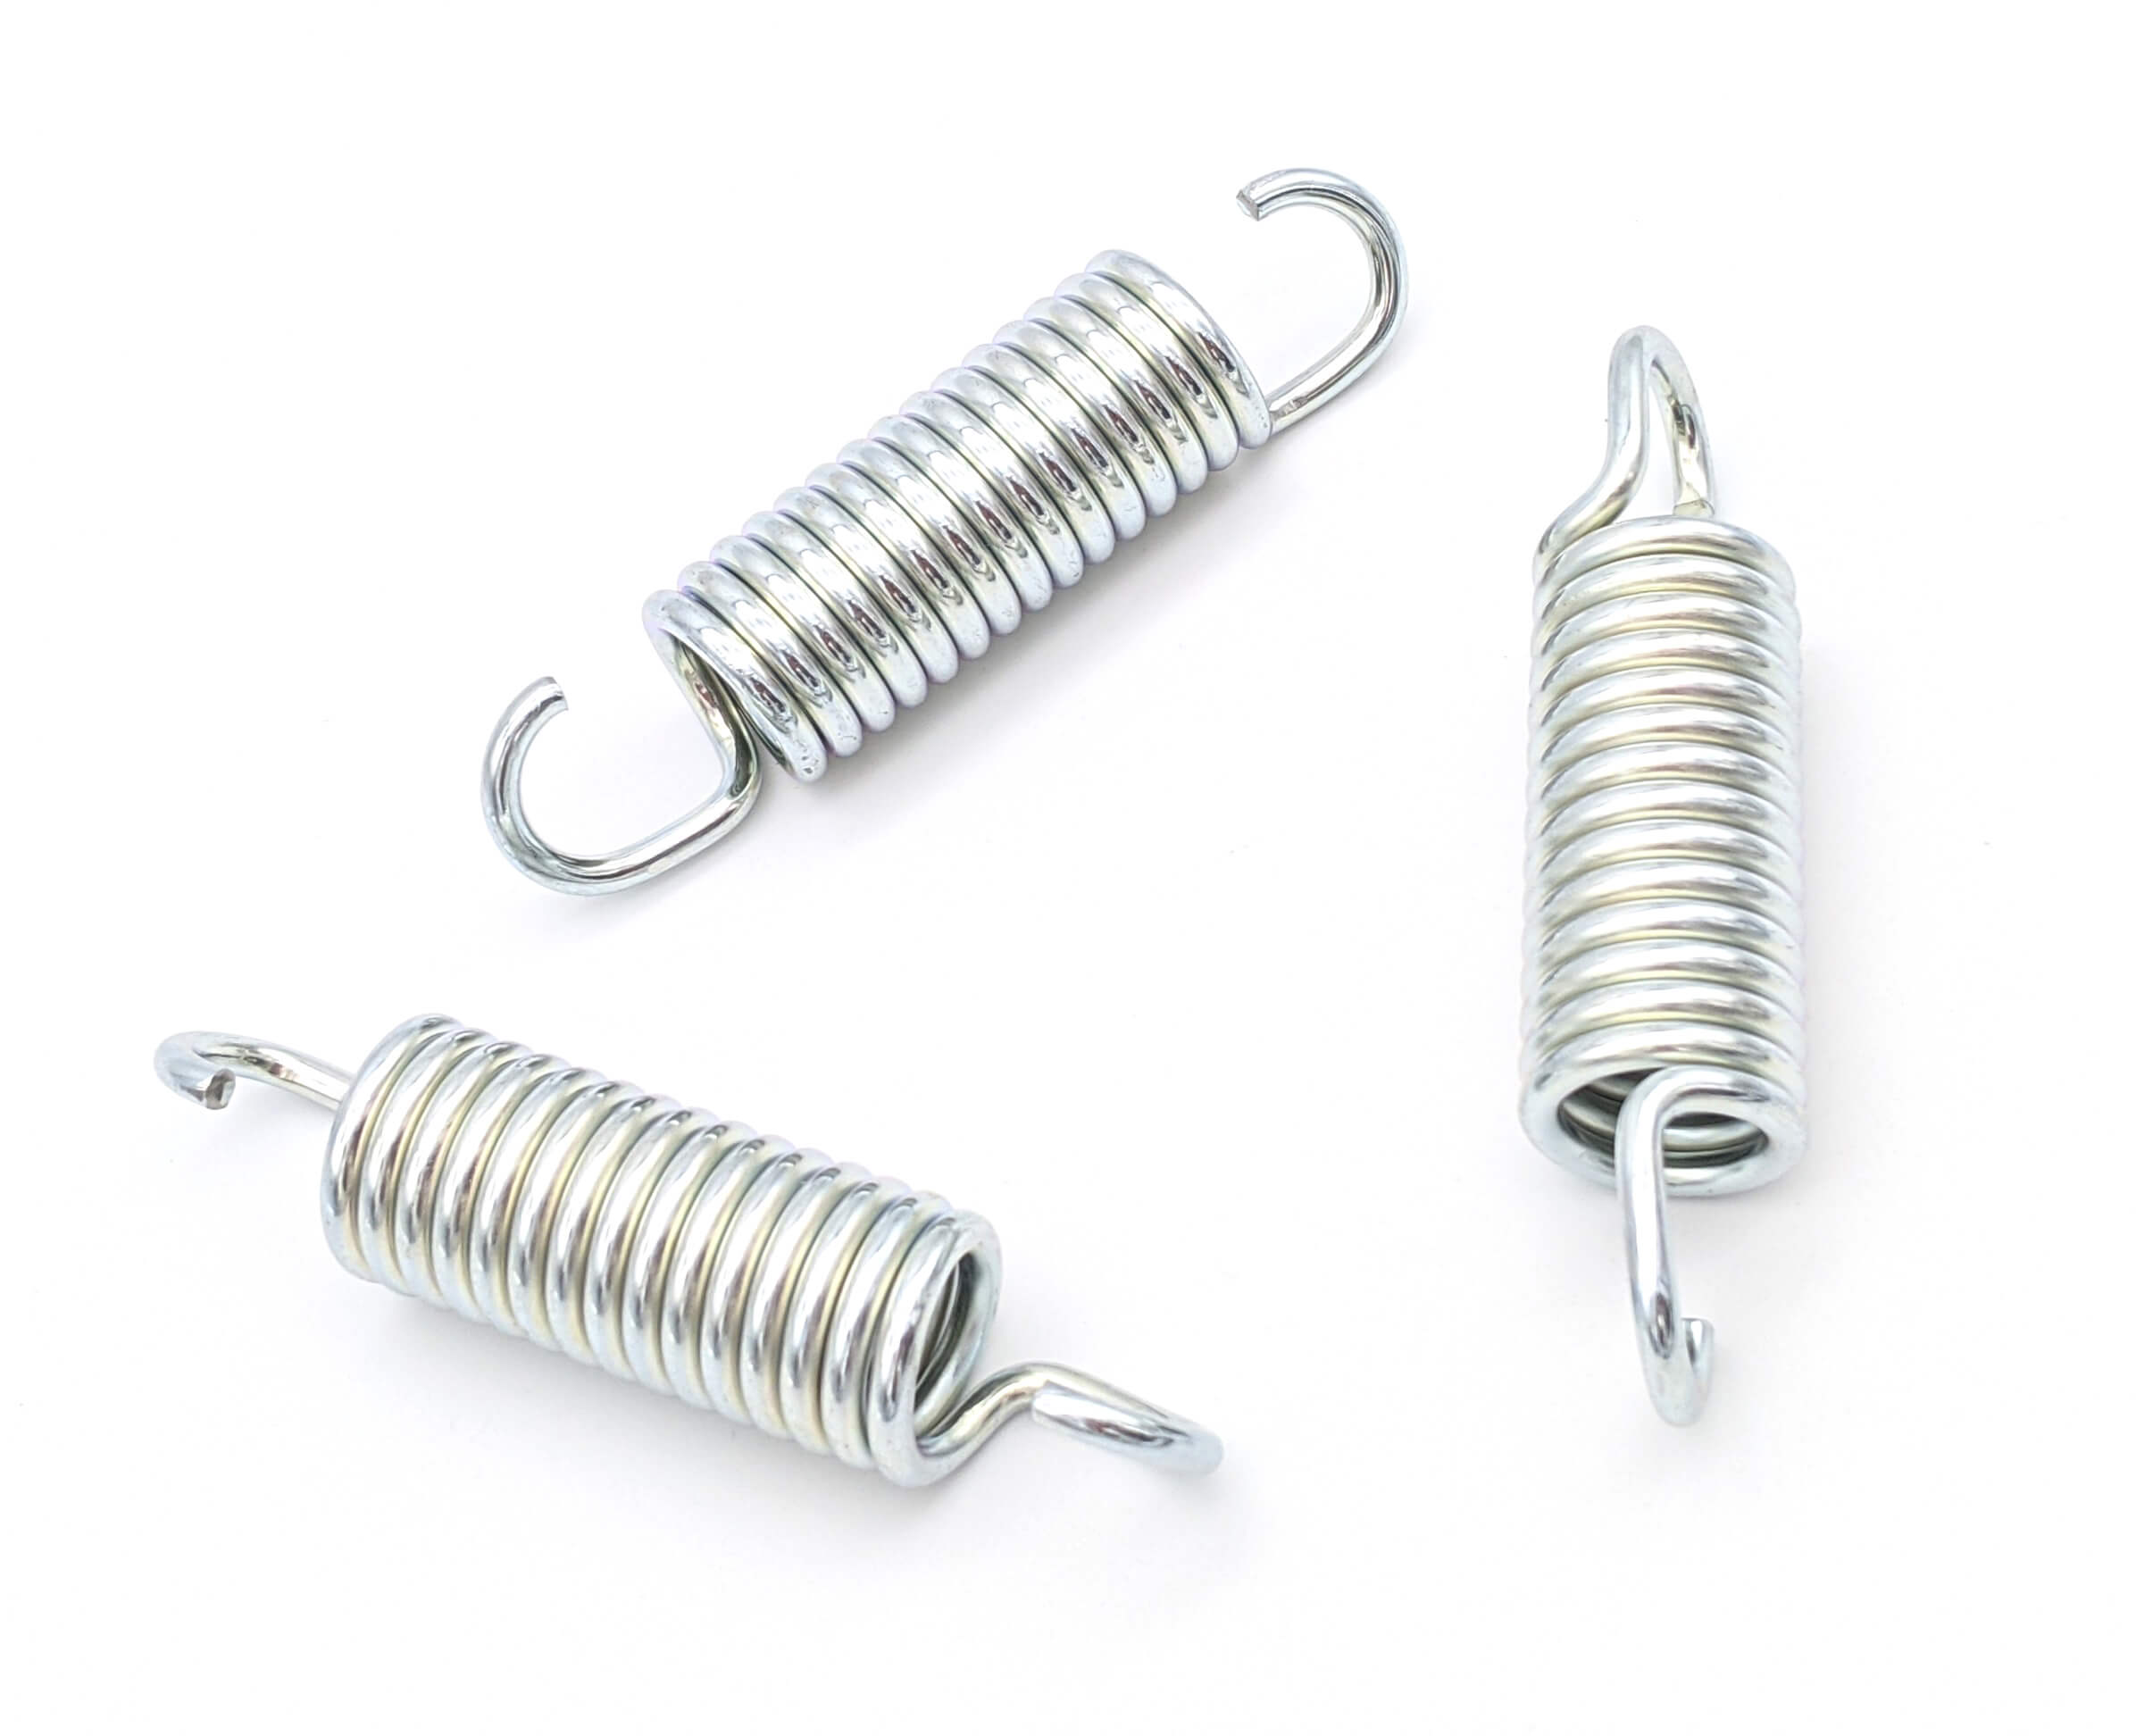 What Is an Extension Spring & What Is It Used For?